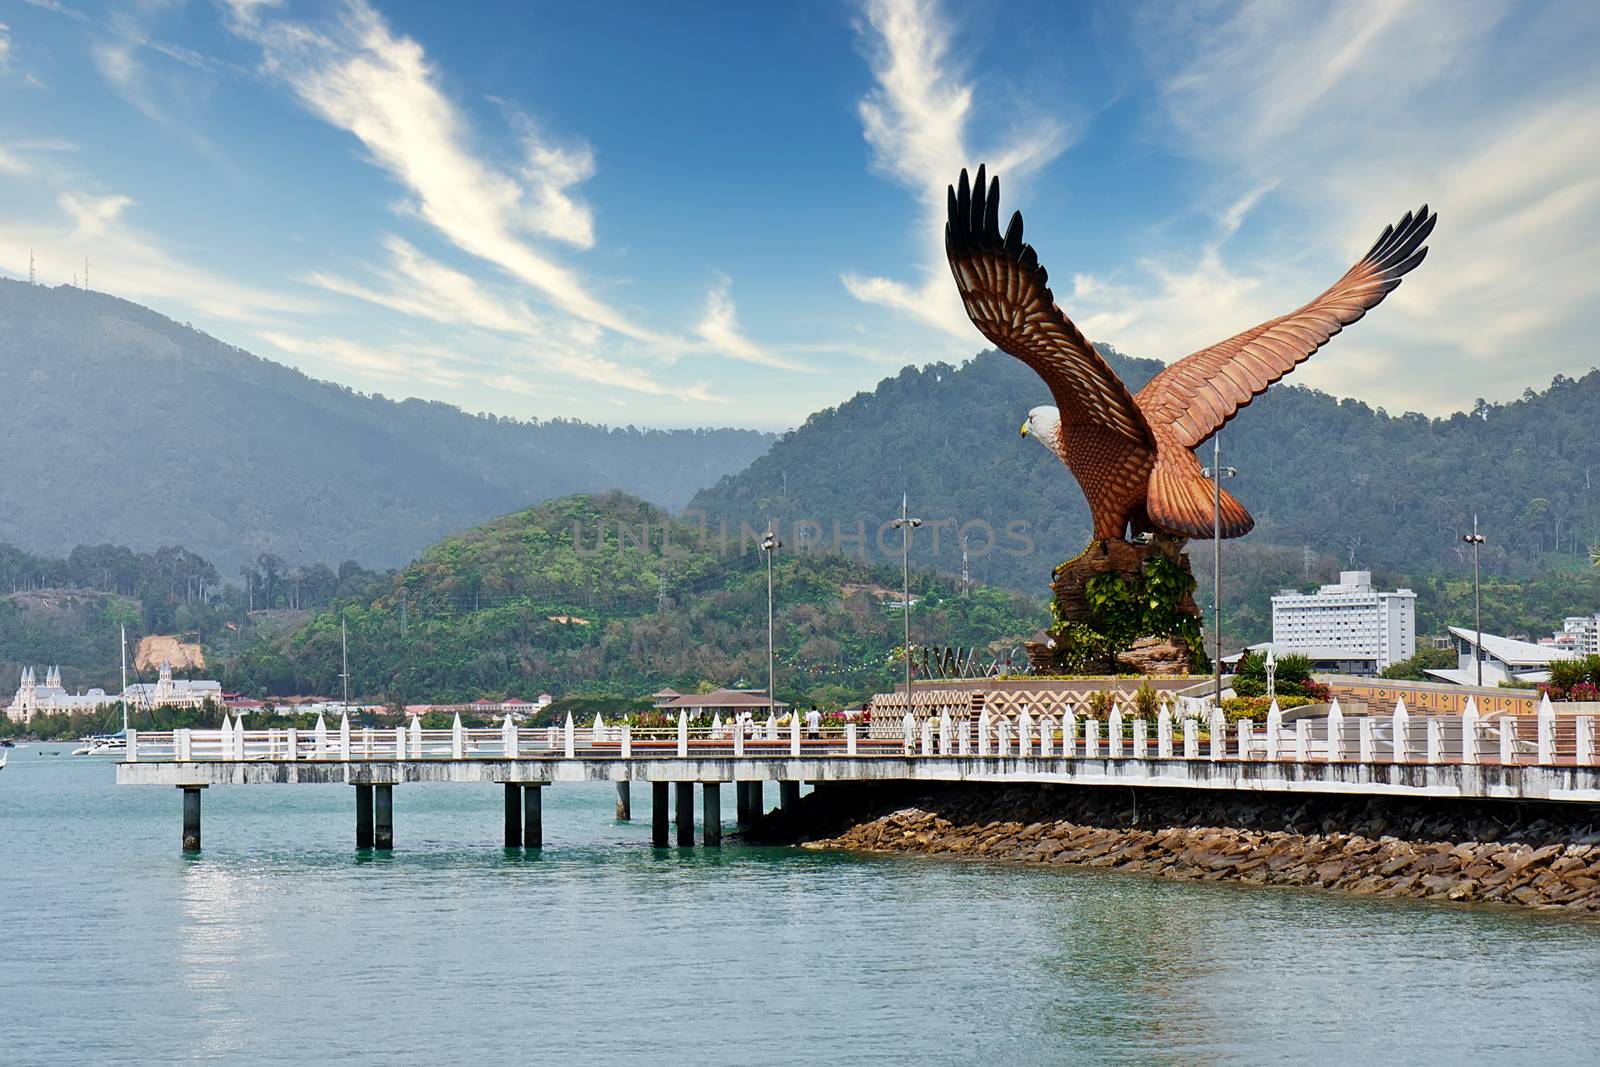 Eagle square with the eagle giant sculpture facing the see at Langkawi, Malaysia